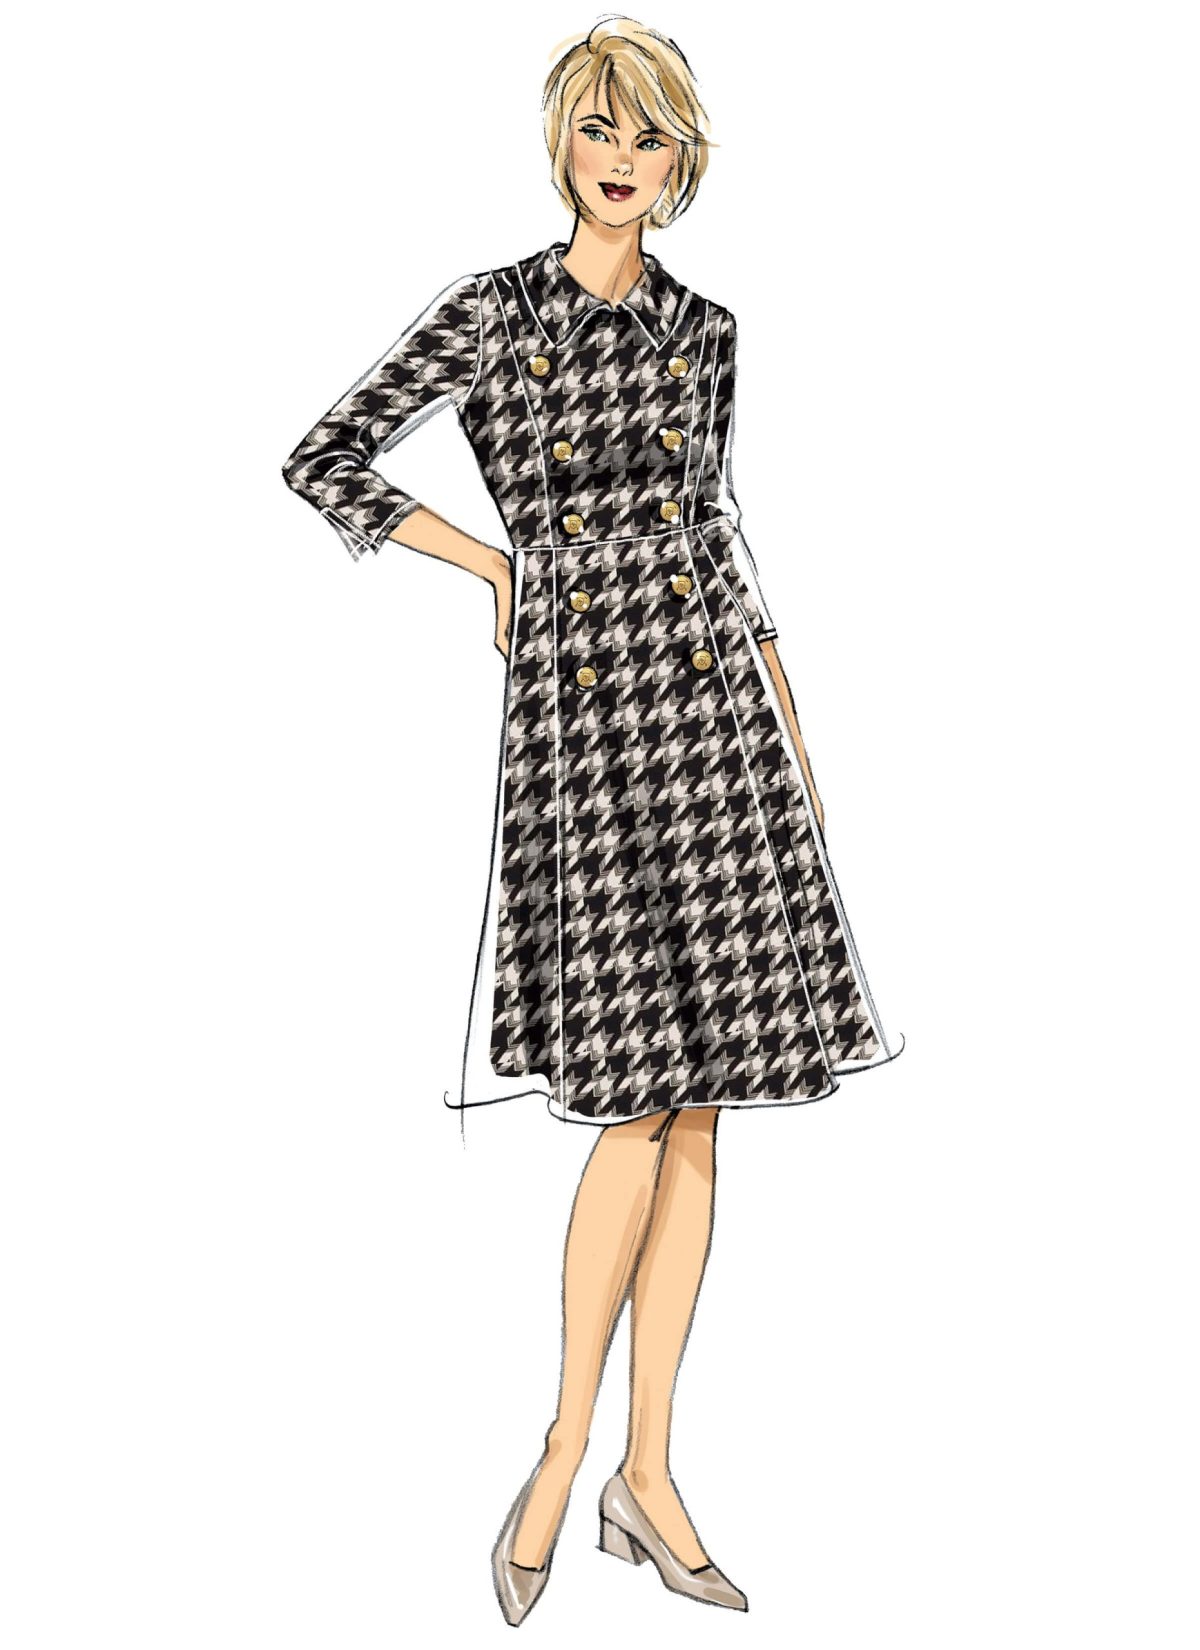 Butterick Sewing Pattern B6871 Misses' A-line Dress